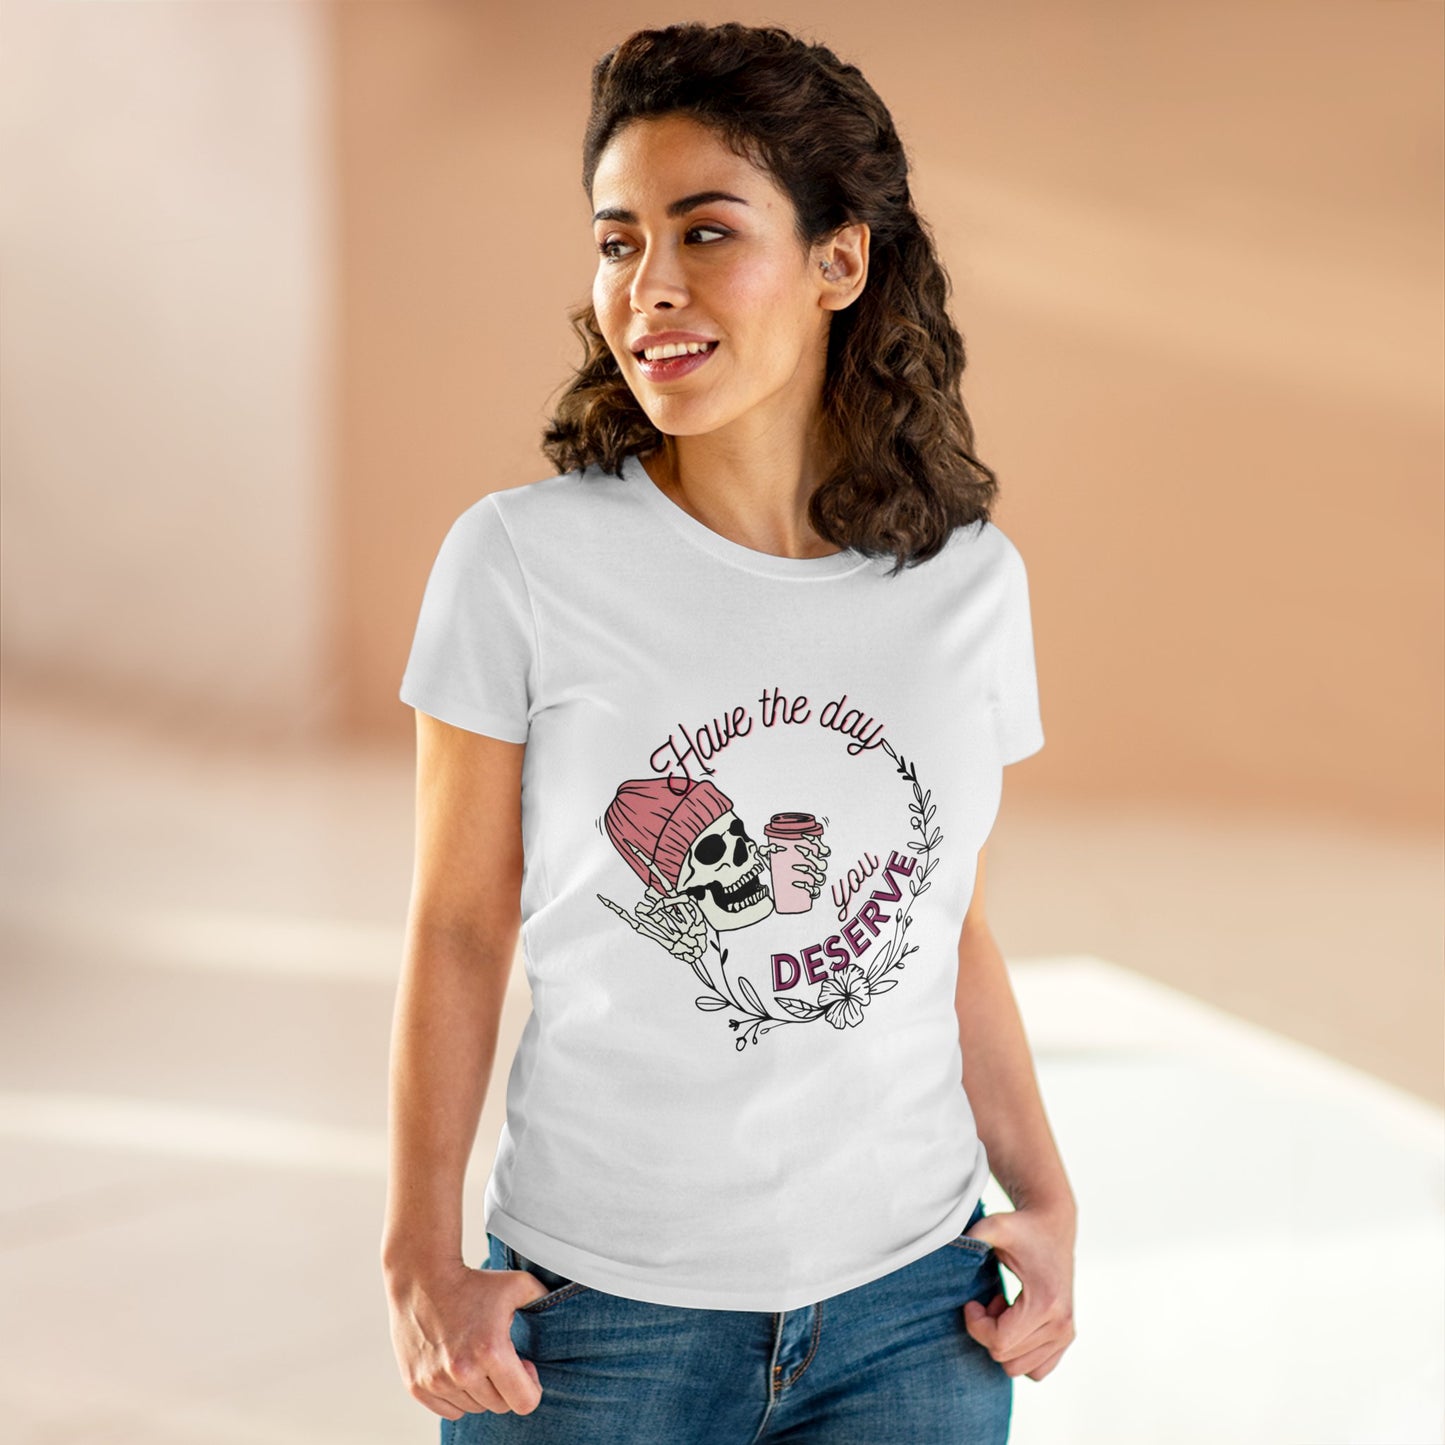 Have the Day You Deserve Tee for Women